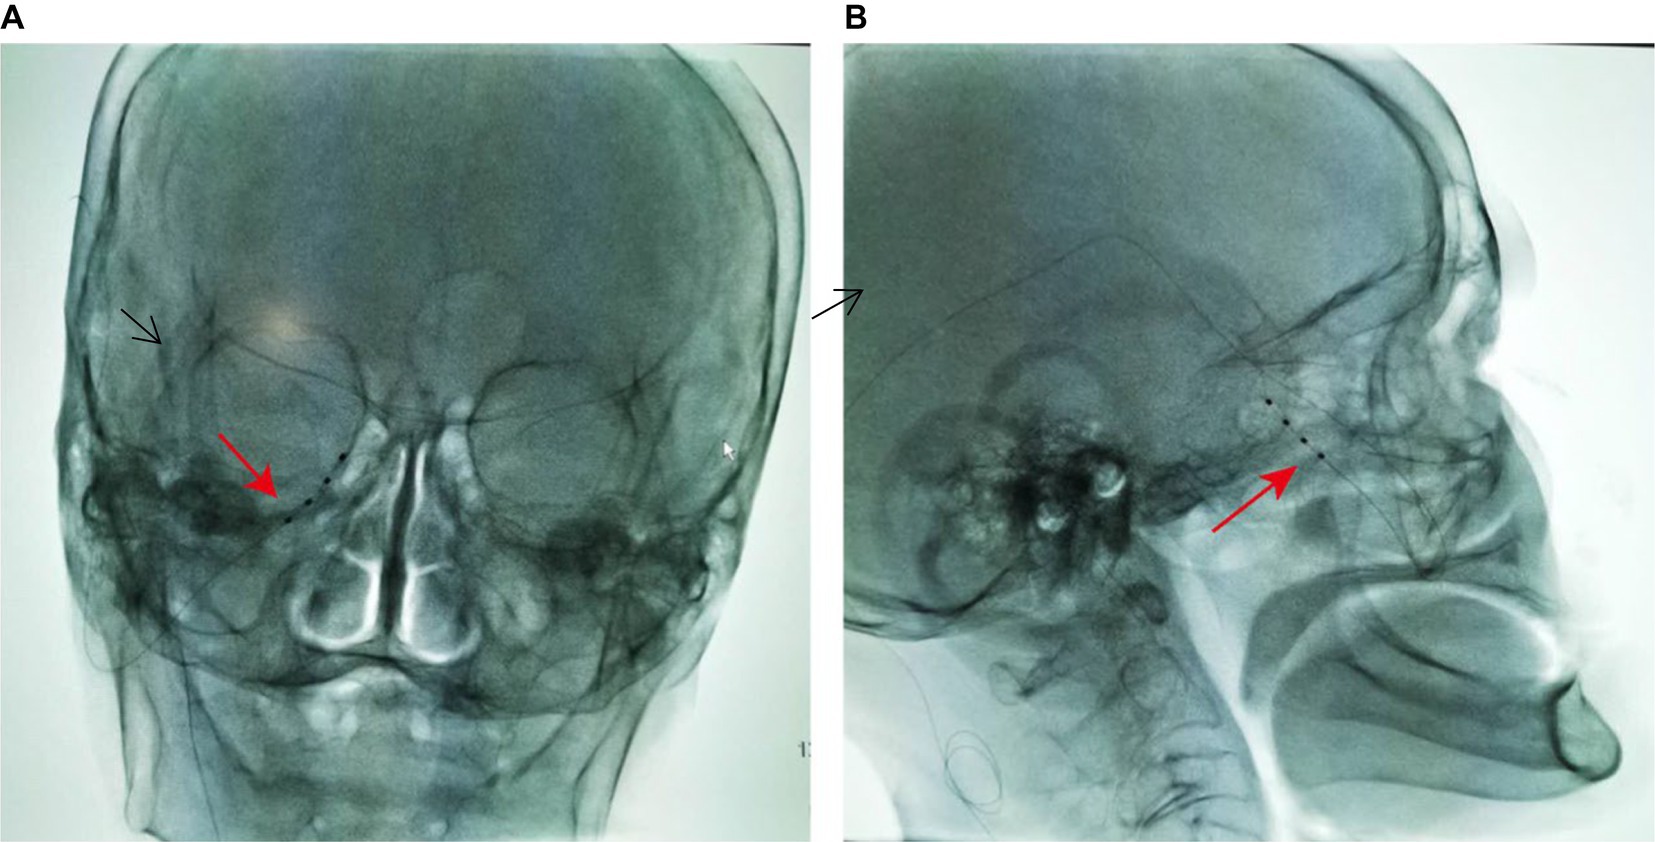 Frontiers  Case report: Use of peripheral nerve stimulation for